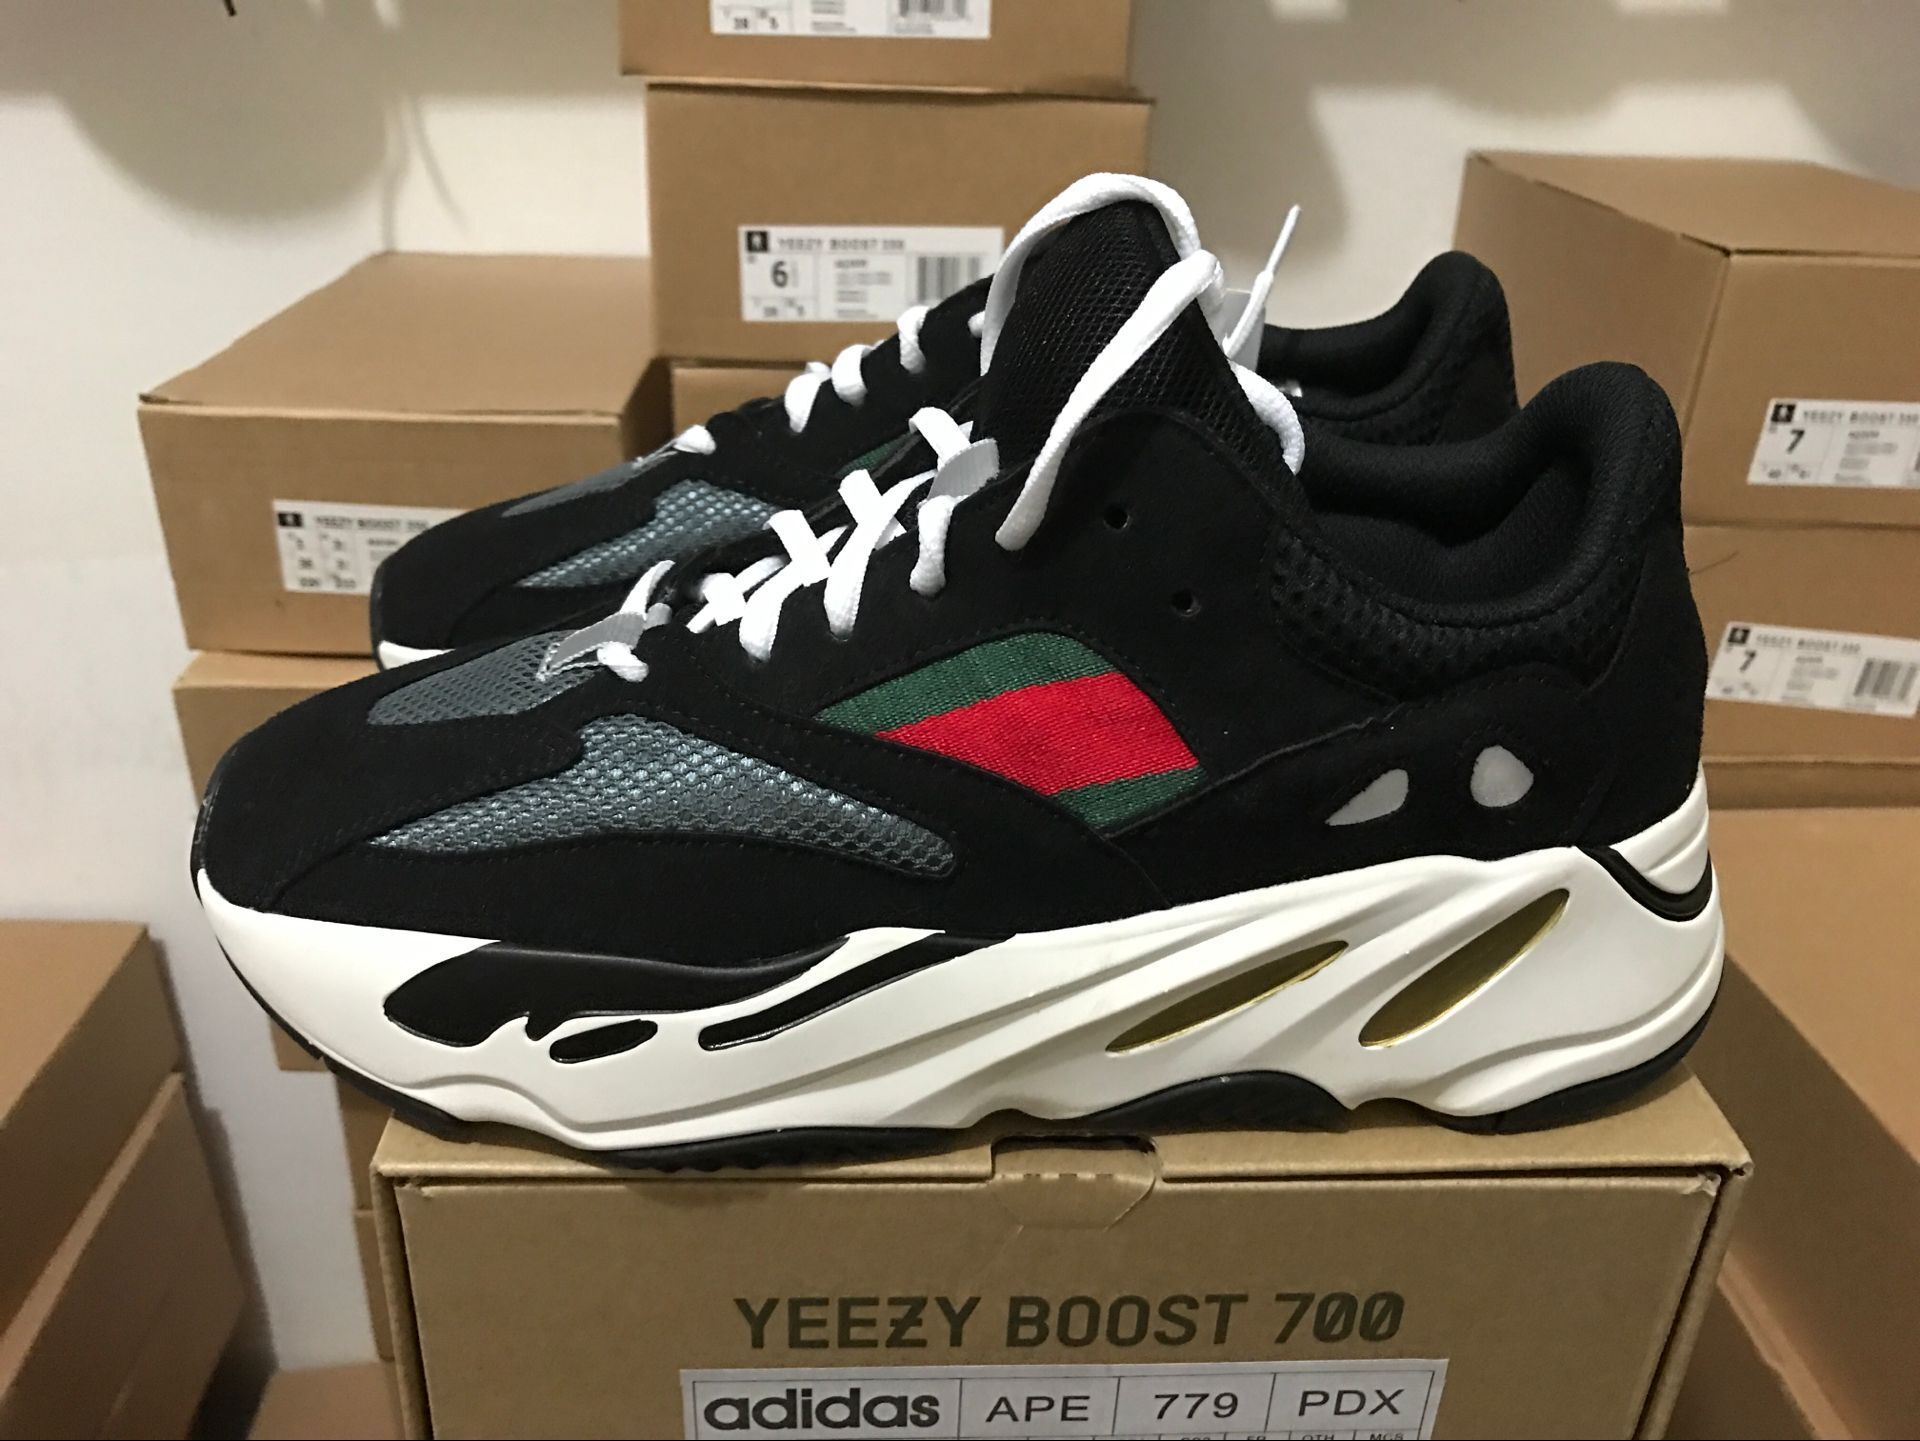 Adidas Yeezy Boost 700 Gucci - SNEAKX